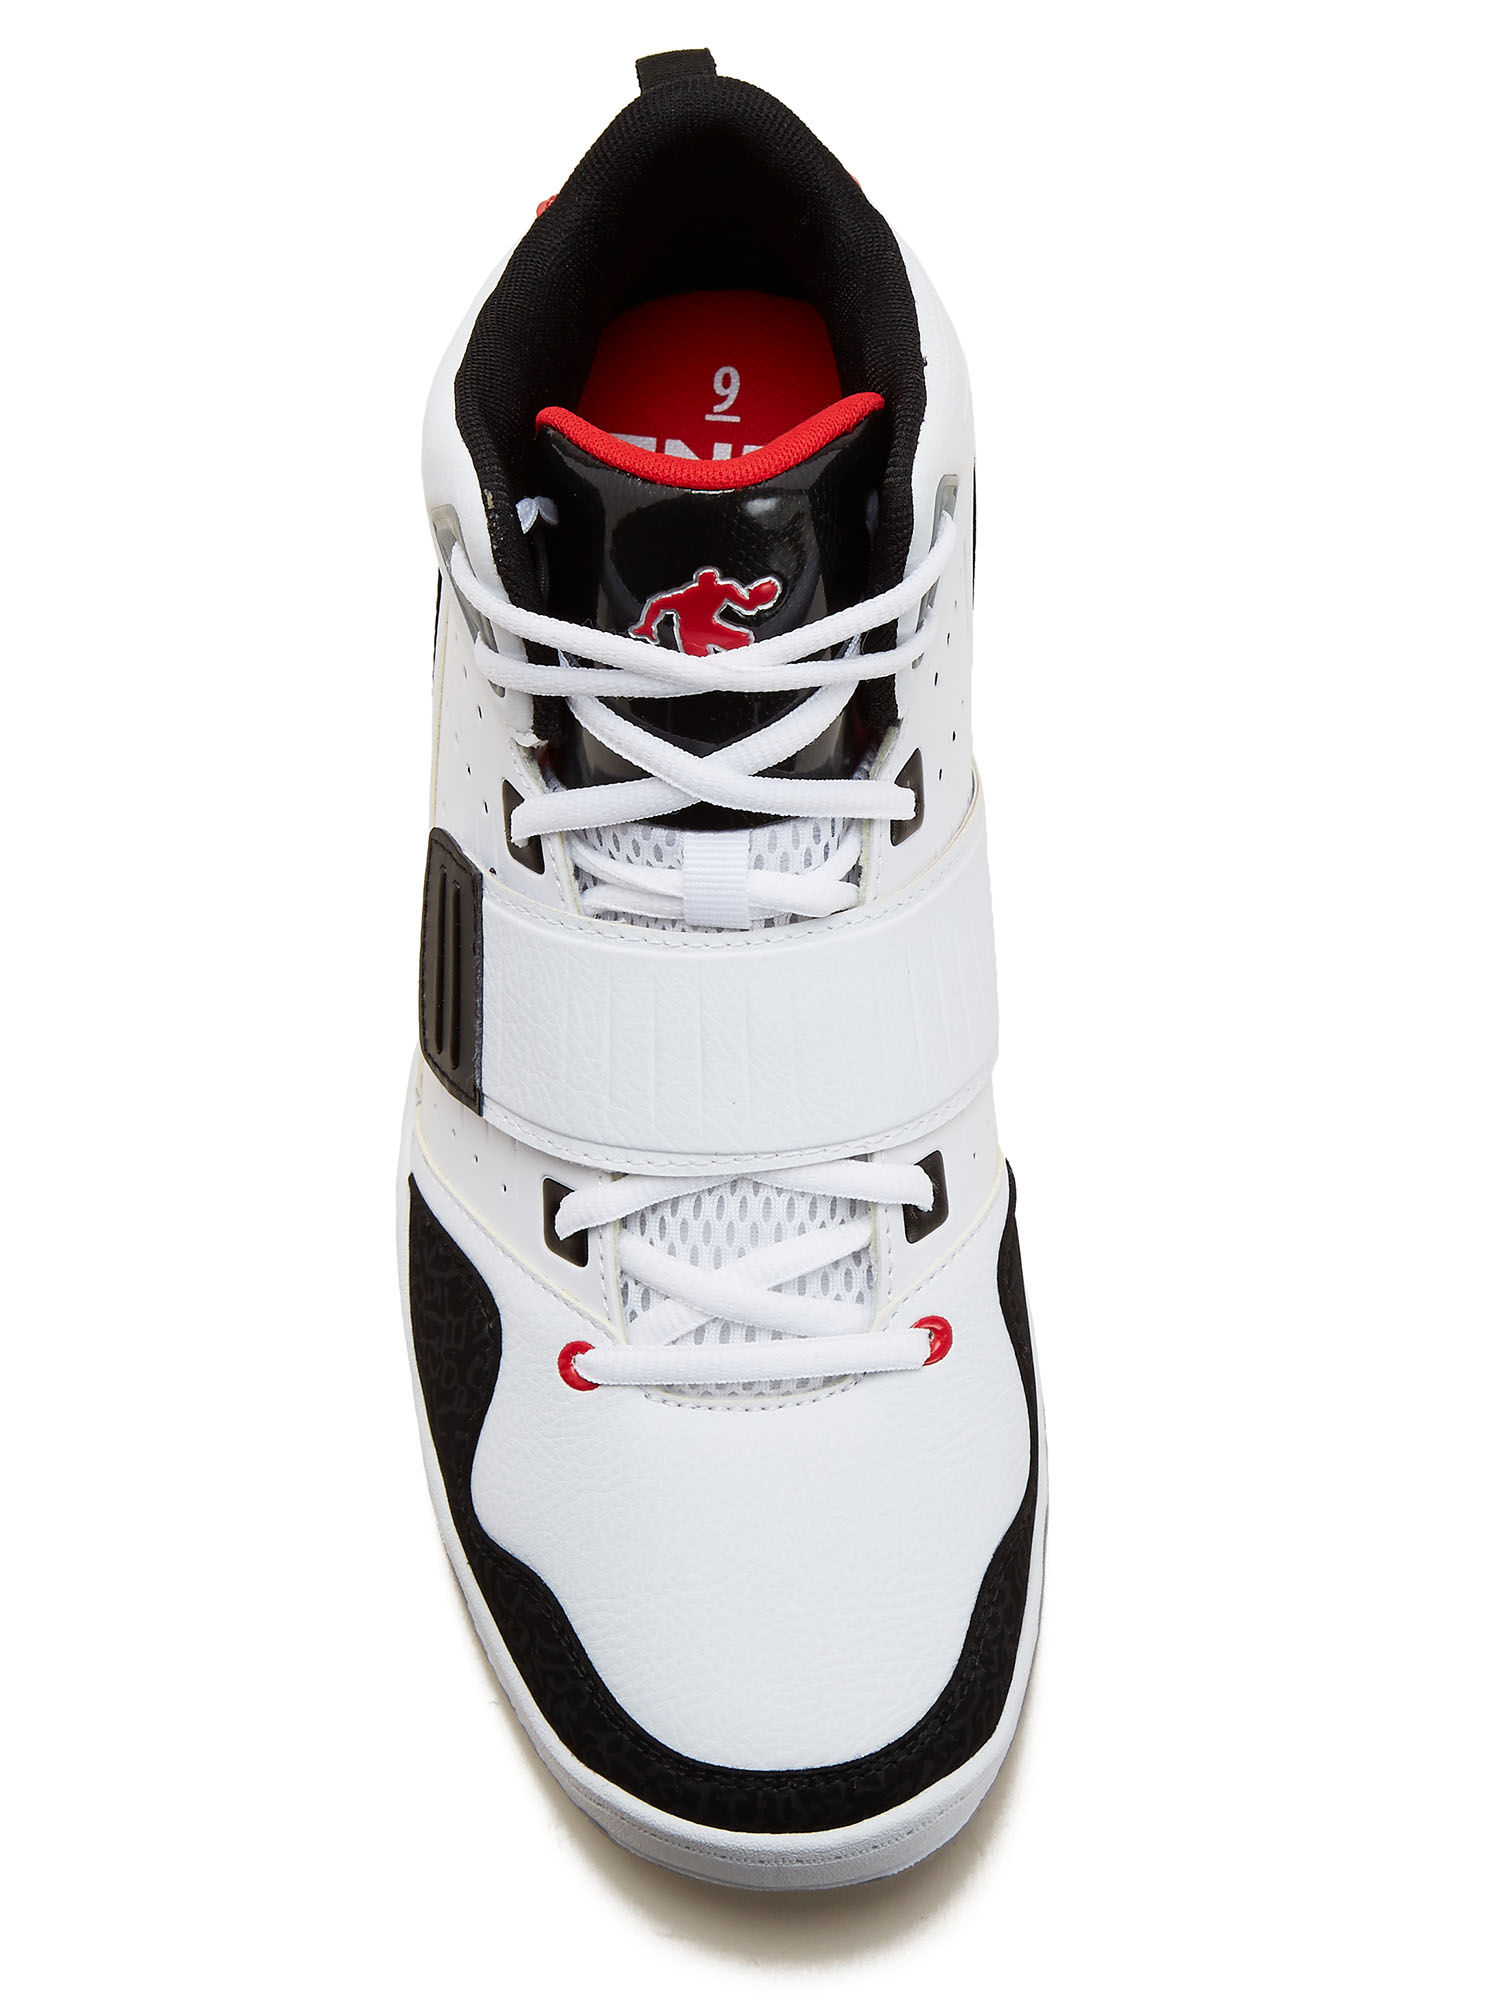 And1 Men's Capital 3.0 Basketball Shoe with Strap - image 2 of 6